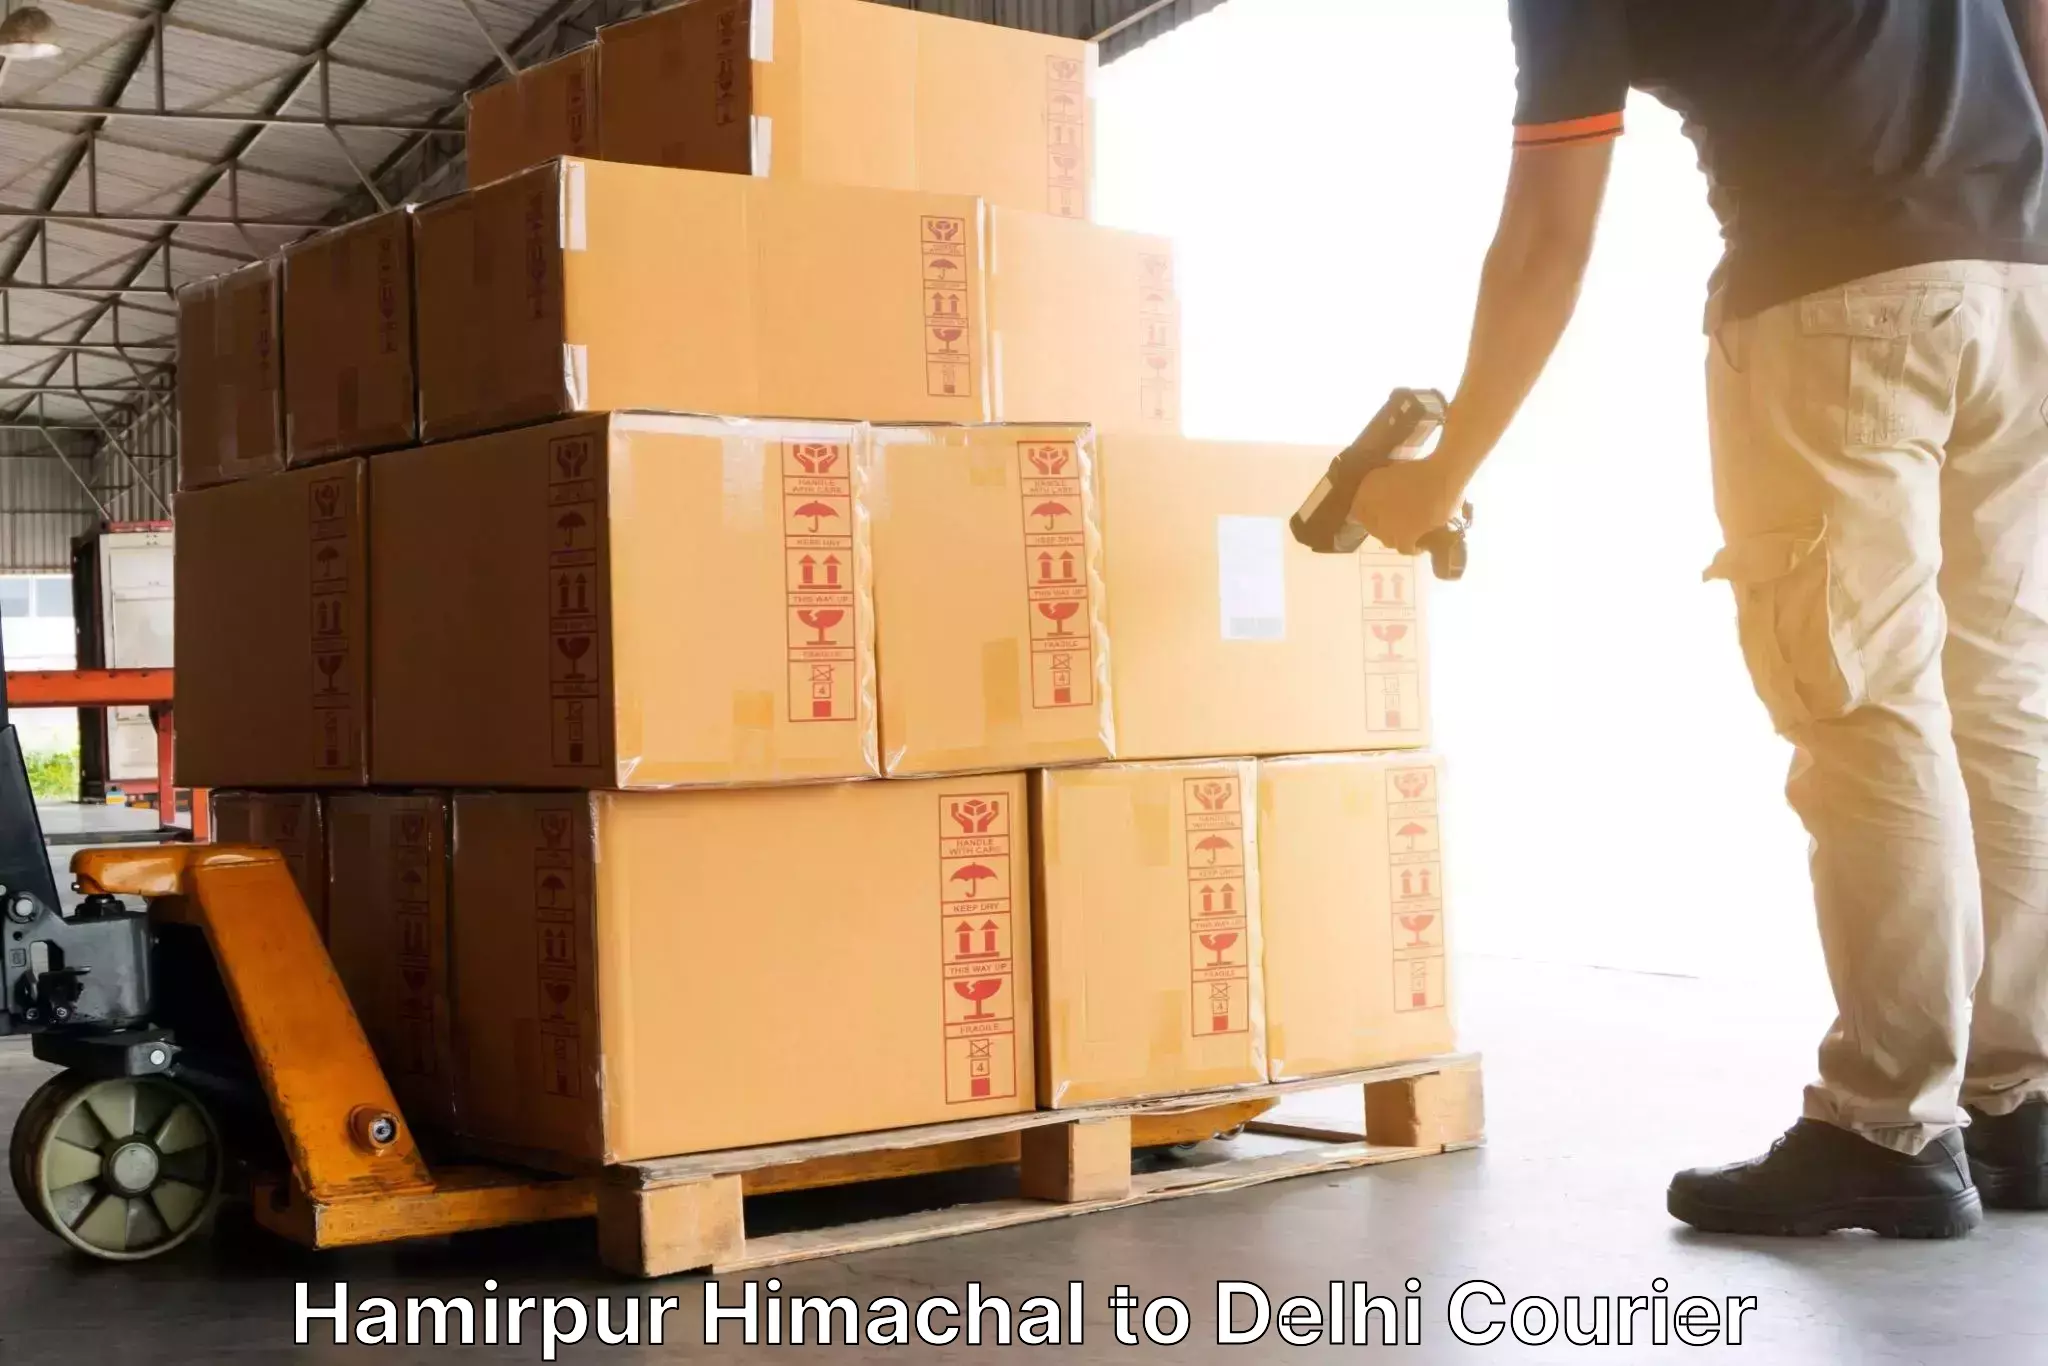 Reliable delivery network Hamirpur Himachal to Delhi